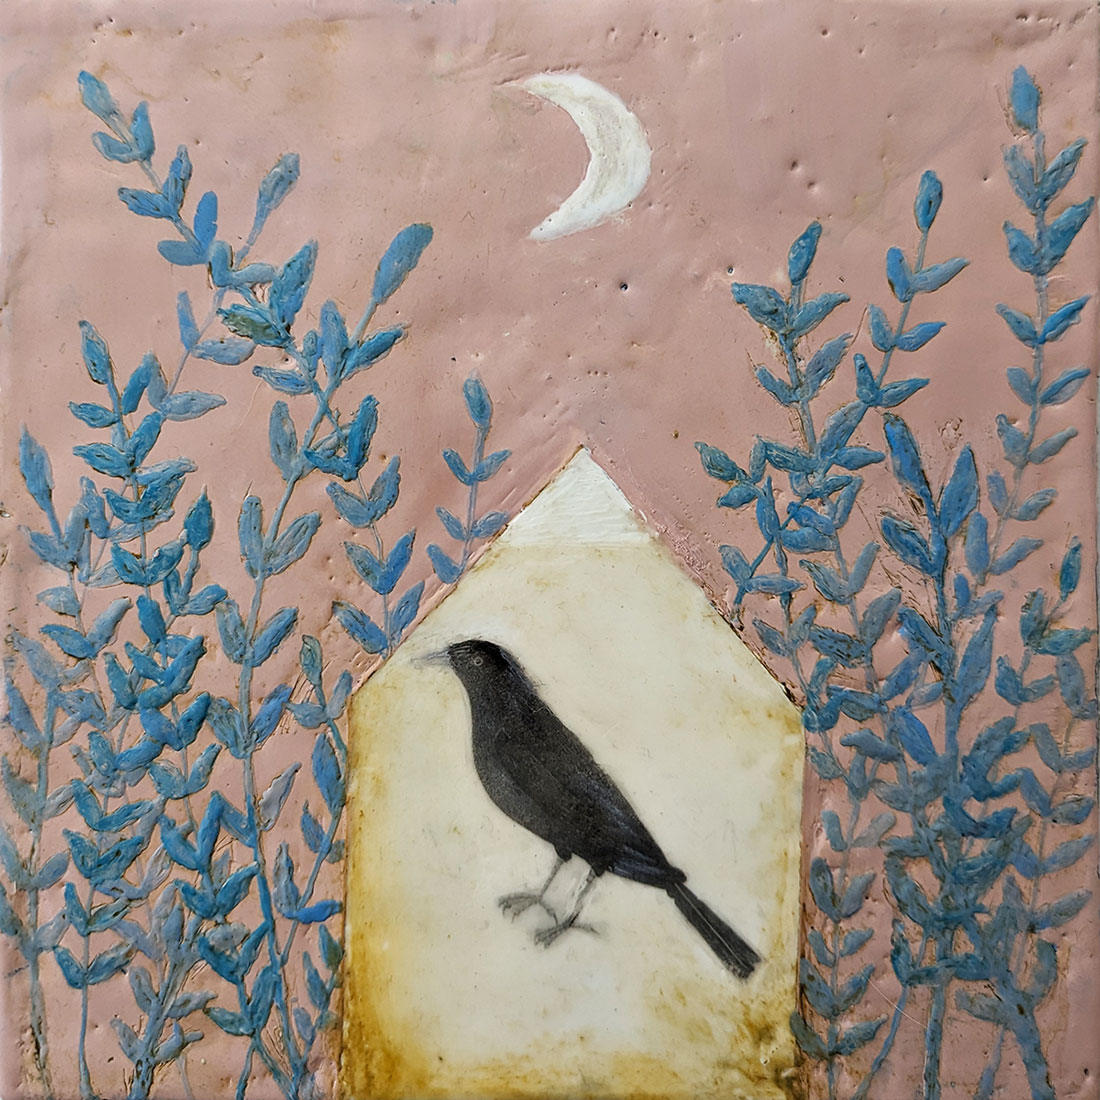 Dwell In the Light is an encaustic mixed media painting by Bridgette Guerzon Mills